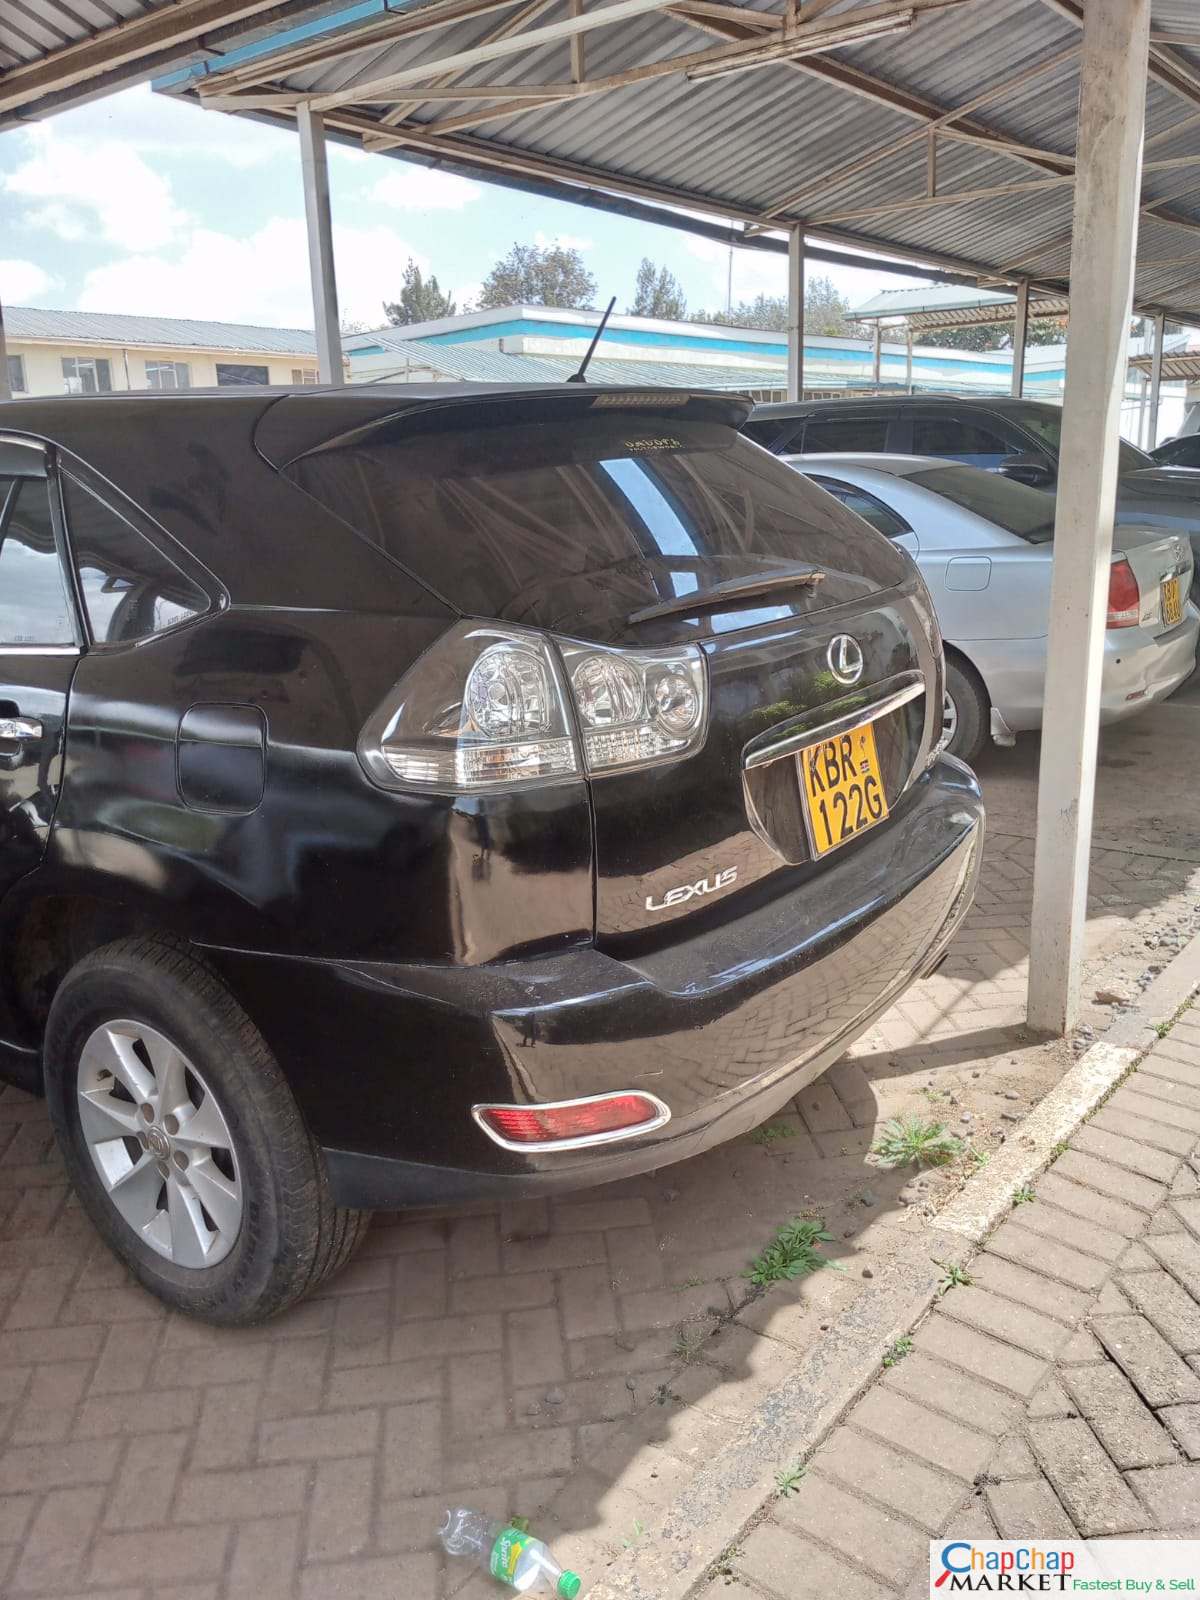 Toyota Harrier Kenya You Pay 30% Deposit Trade in OK EXCLUSIVE Toyota harrier for sale in Kenya hire purchase installments